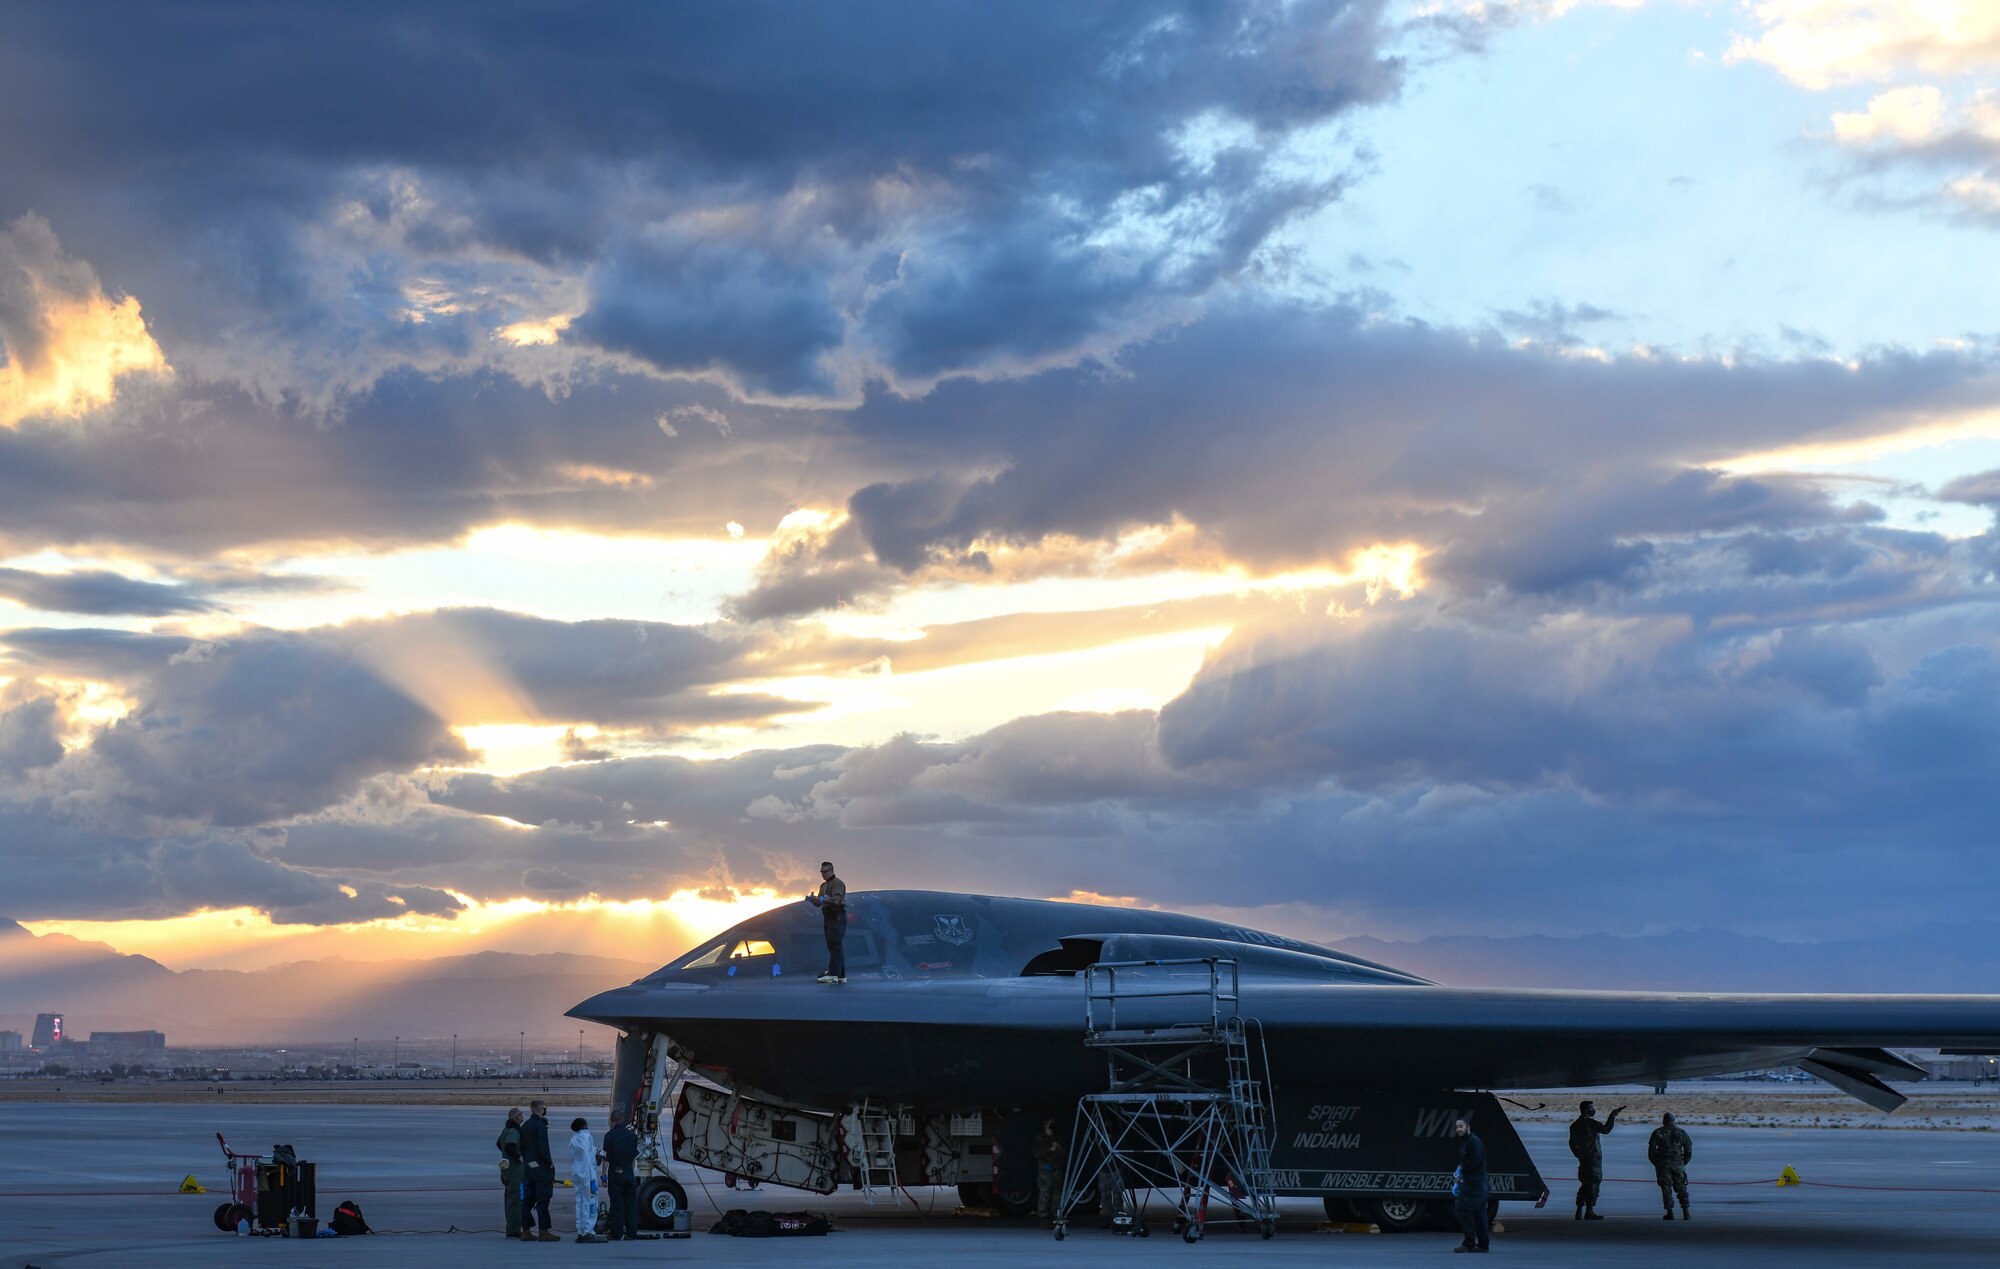 Maintenance Airmen with the 393rd Expeditionary Bomb Squadron conduct post-flight checks on a B-2 Spirit Stealth Bomber during Red Flag 21-1, at Nellis Air Force Base, Nevada, Jan. 22, 2021. Red Flag 21-1 is the U.S. Air Force's premier air-to-air combat training exercise that provides opportunity to enhance readiness and training as a joint force, enabling Whiteman to respond to any potential crisis or challenge across the globe. (U.S. Air Force photo by Staff Sgt. Sadie Colbert)